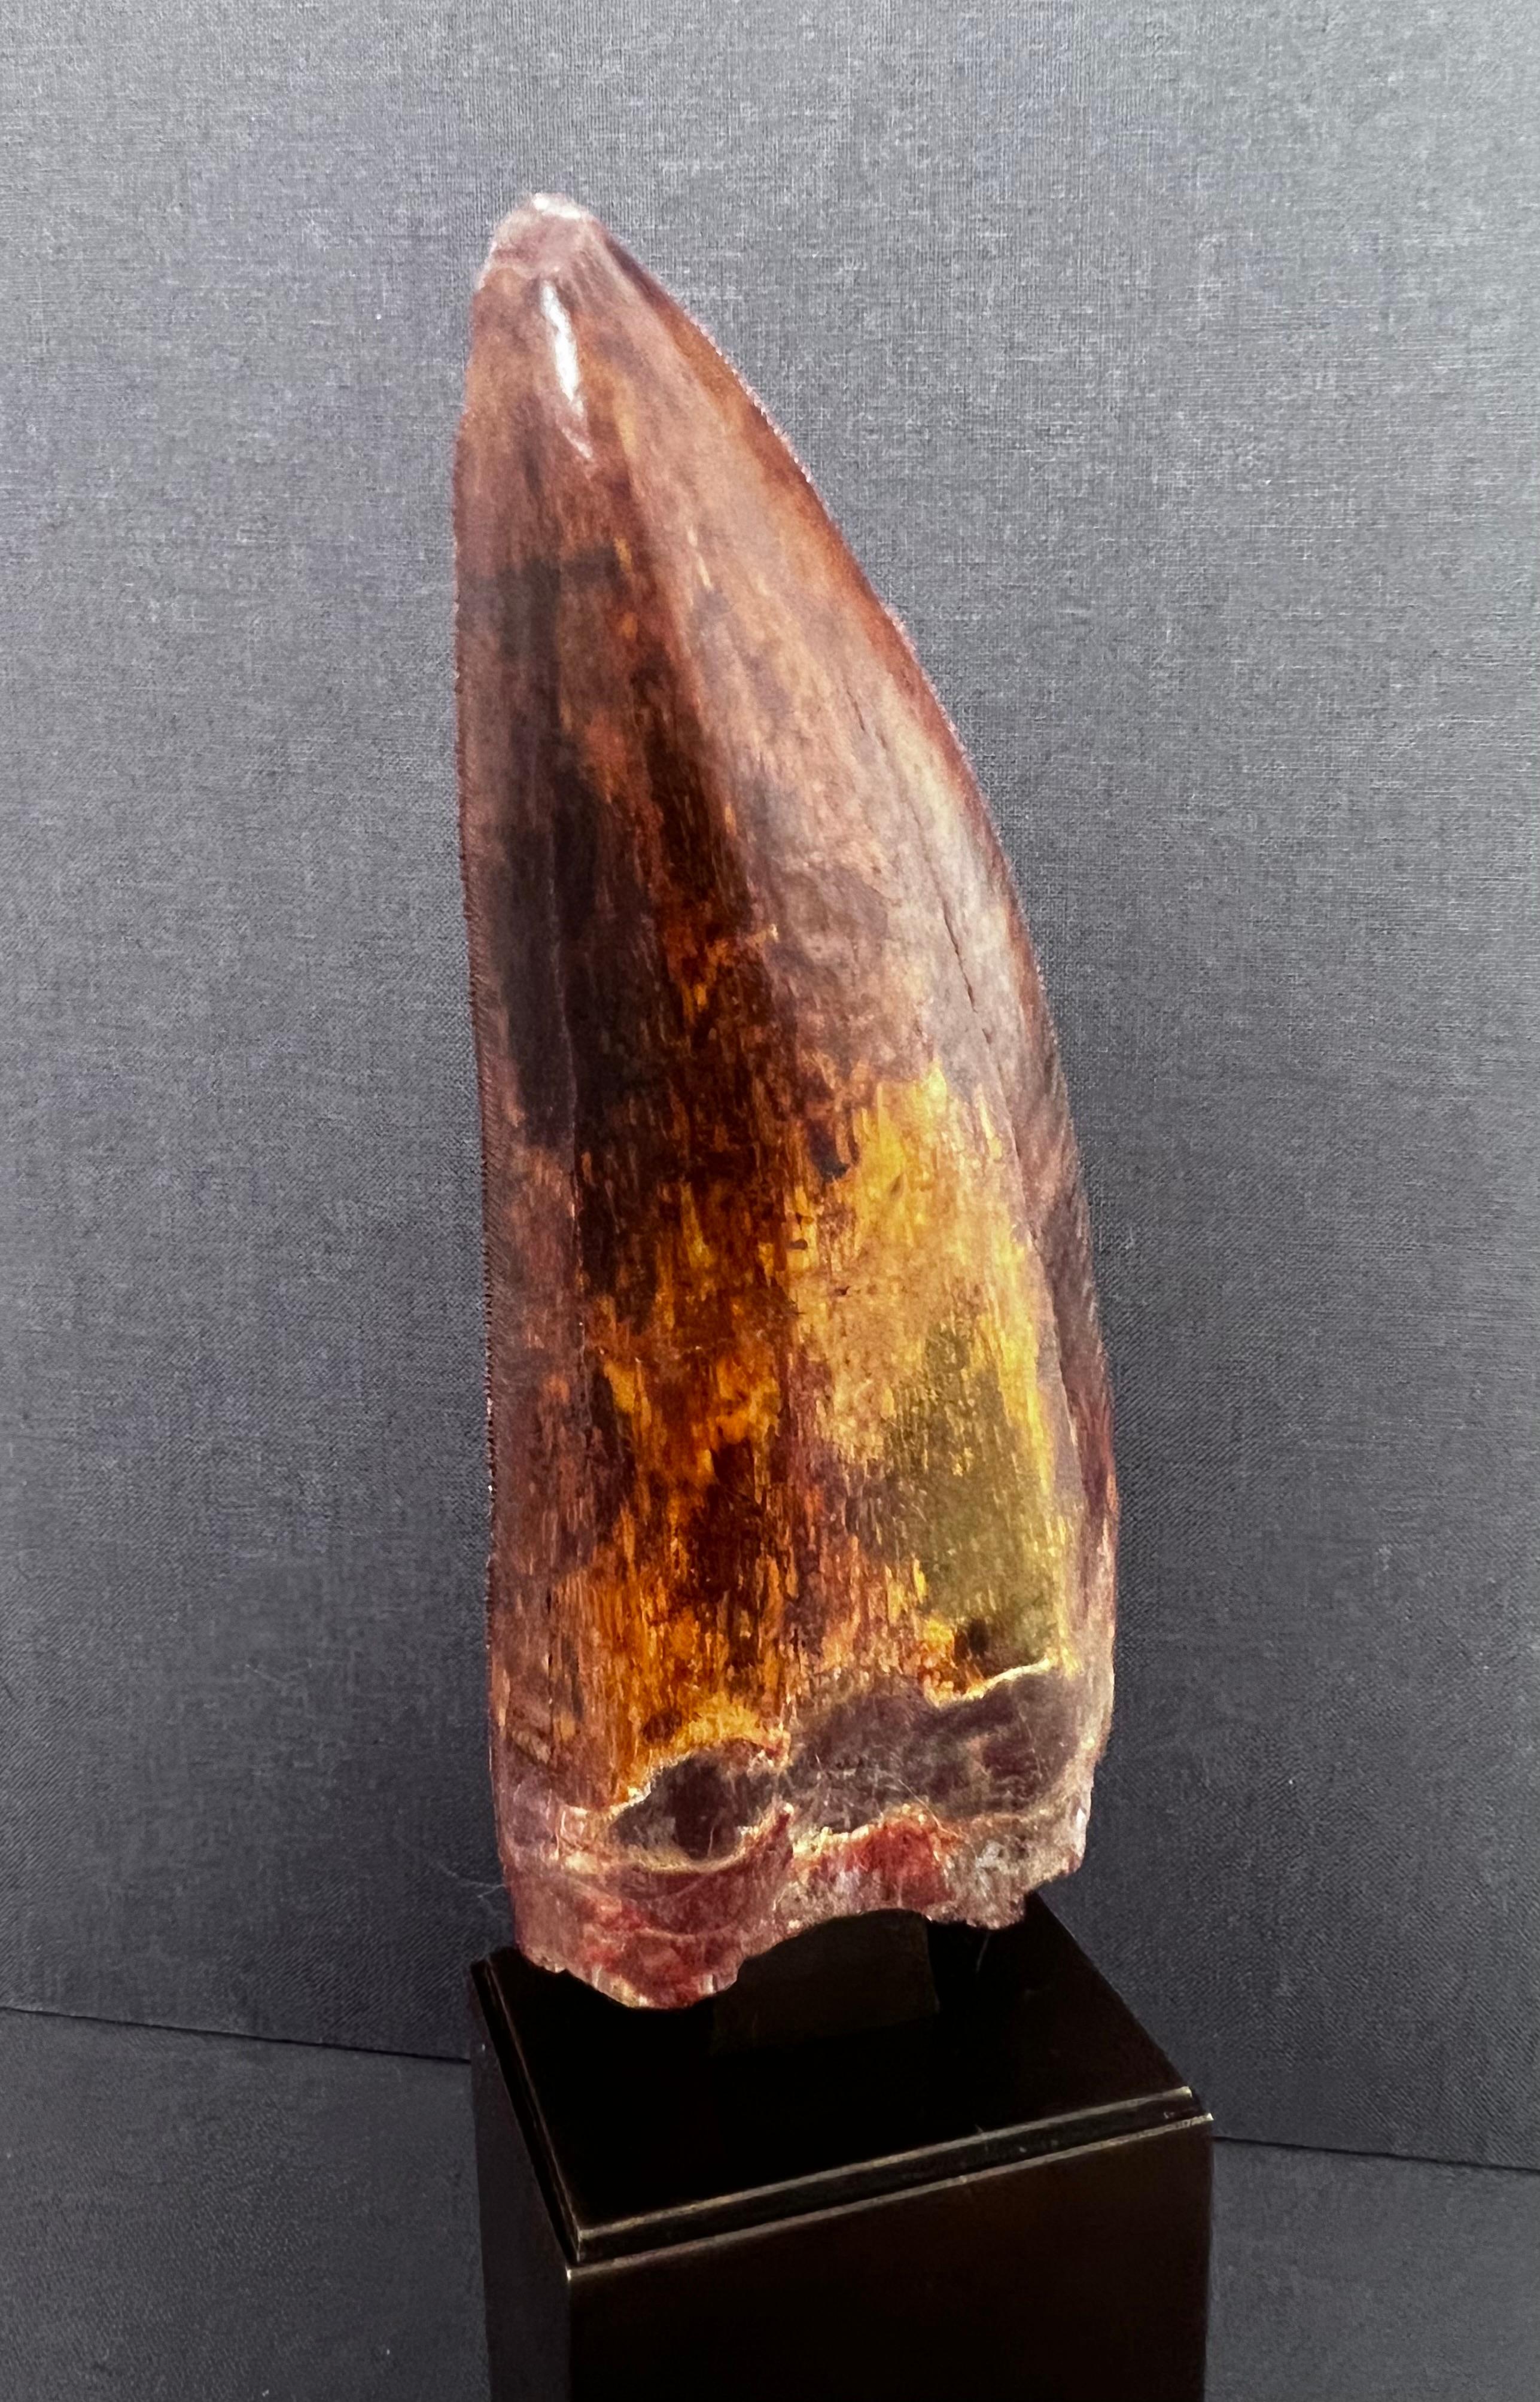 Carnivorous dinosaur tooth (from a very large African T-rex) with mahogany coloured fossilization. Superb condition, crenellated edge visible and in very good condition. Sold on a luxurious brass base with medal patina, with certificate of